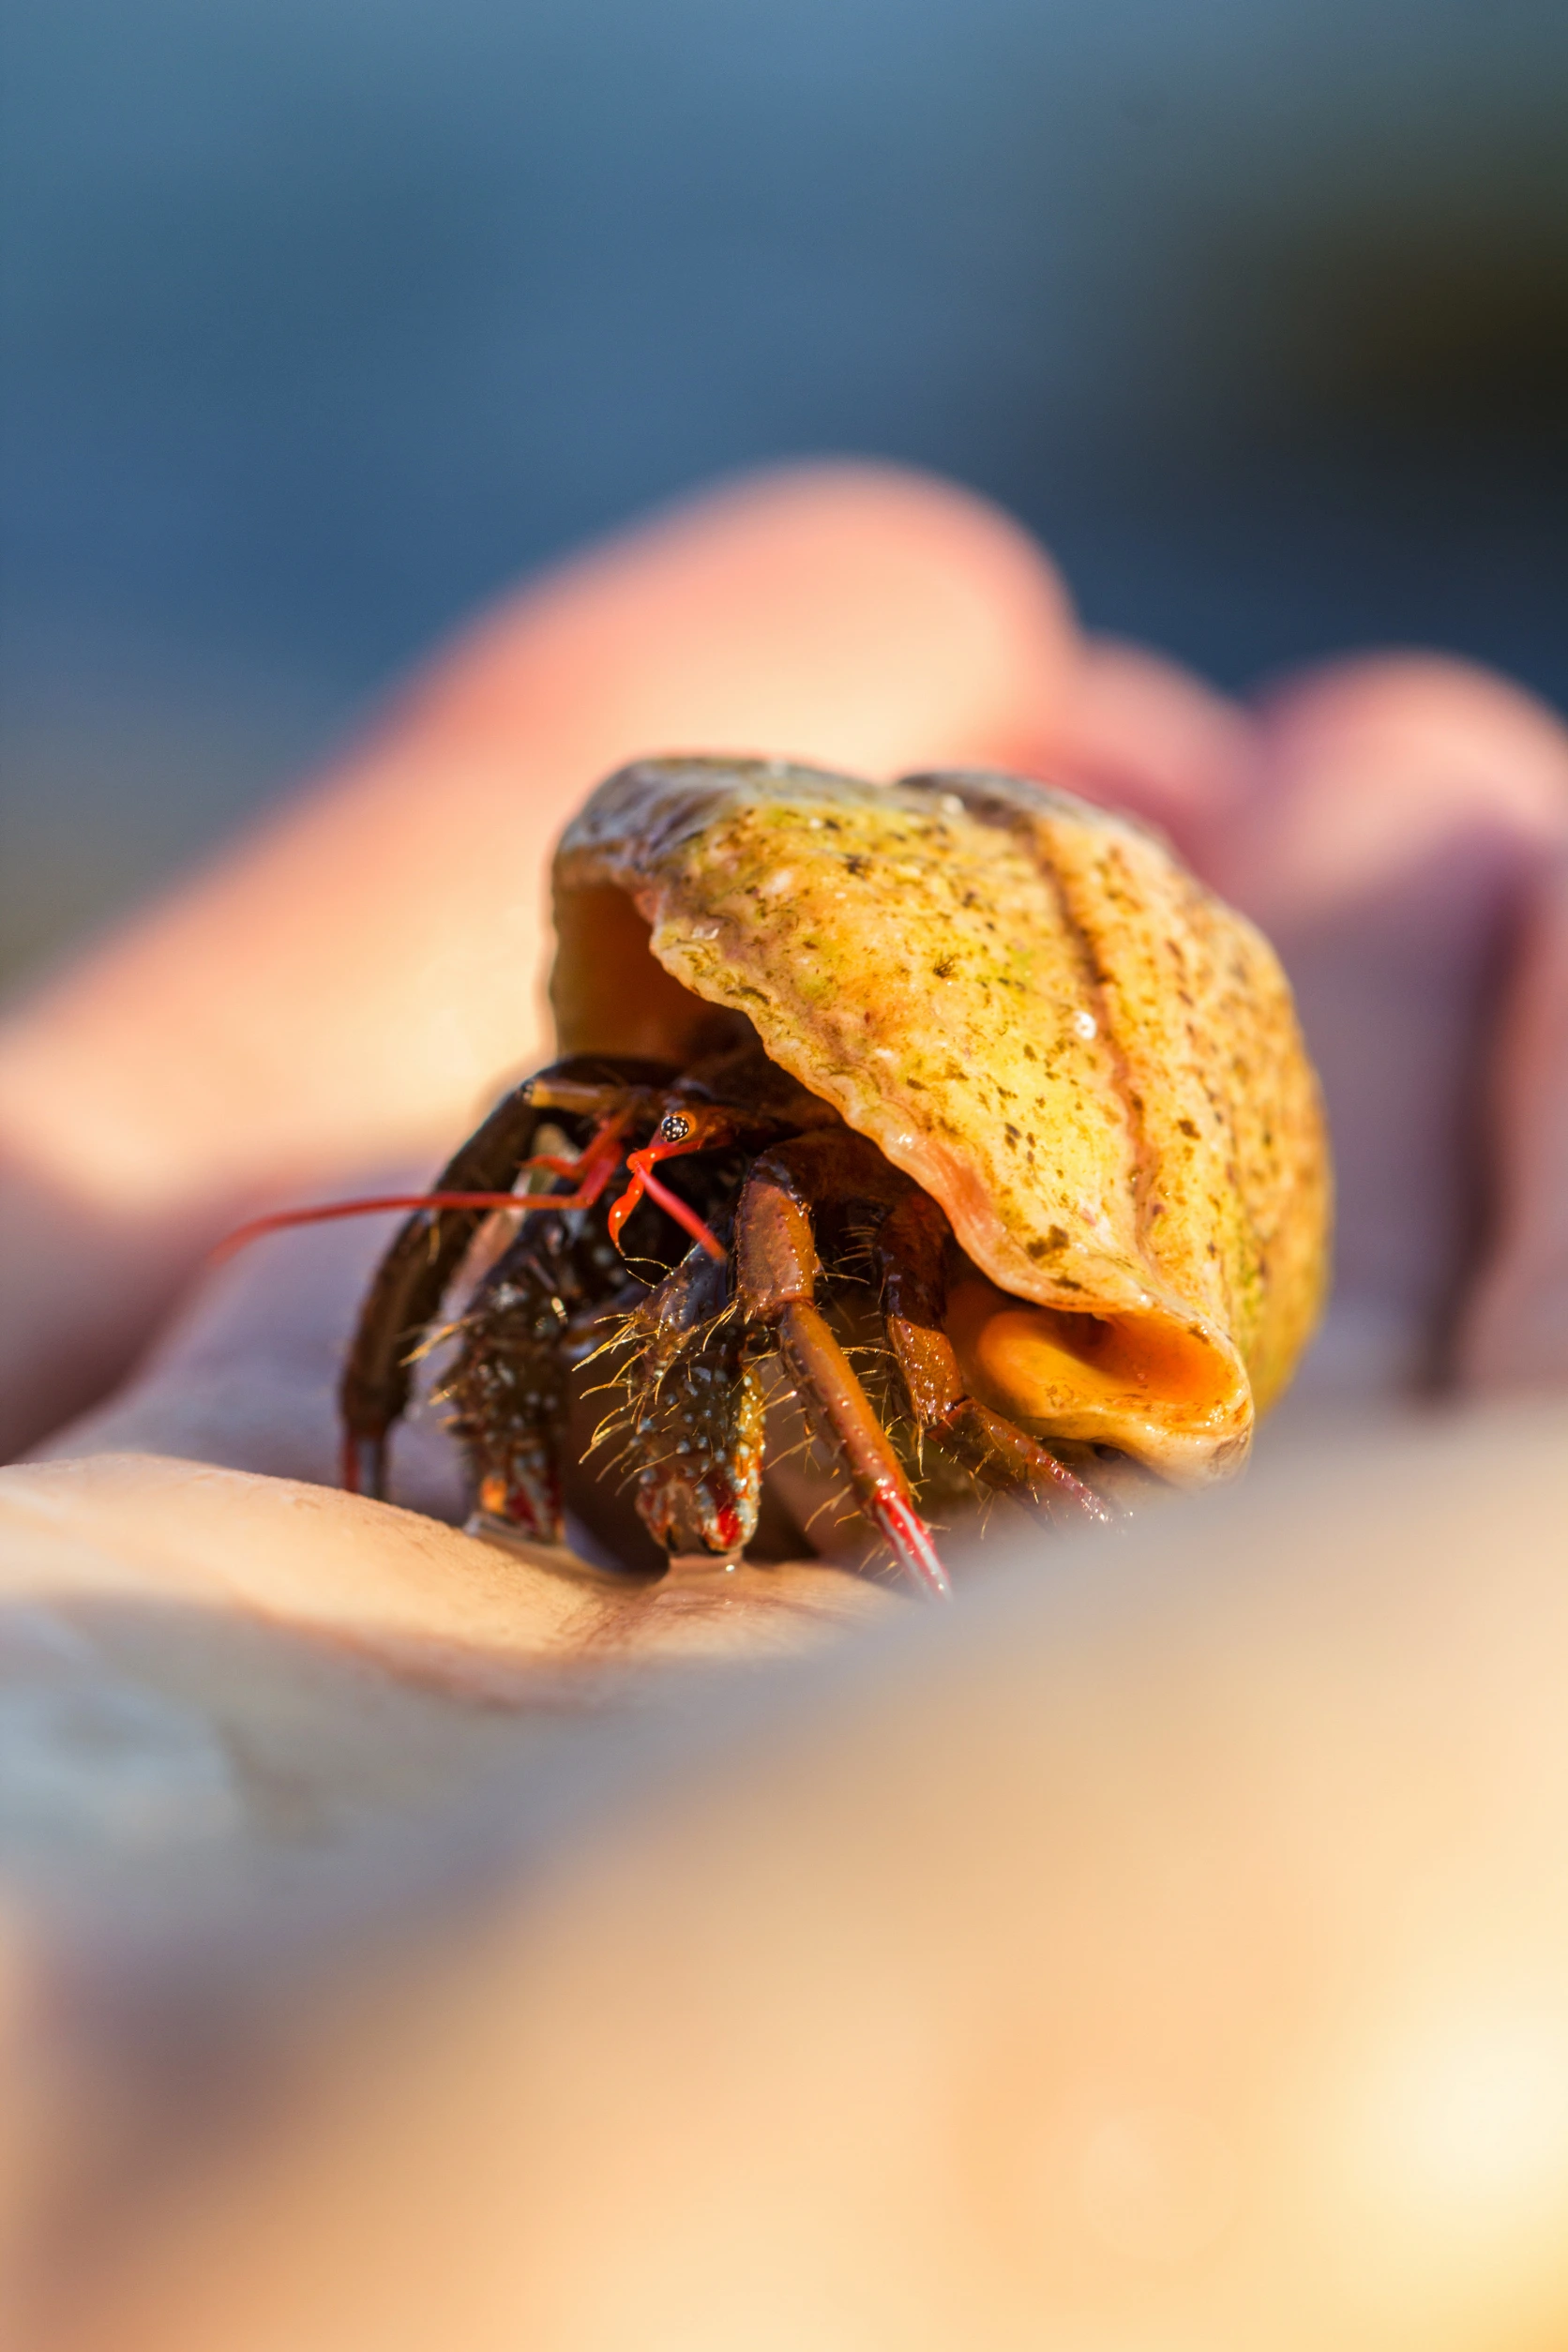 <p>Hermit crabs are interesting and easy-to-care-for pets, ideal for small living areas. They require a small tank with a proper habitat setup and are fascinating creatures to observe.</p> <p>Hermit crabs can be a great choice for those seeking a pet with minimal space and care needs, offering a unique pet-keeping experience.</p>